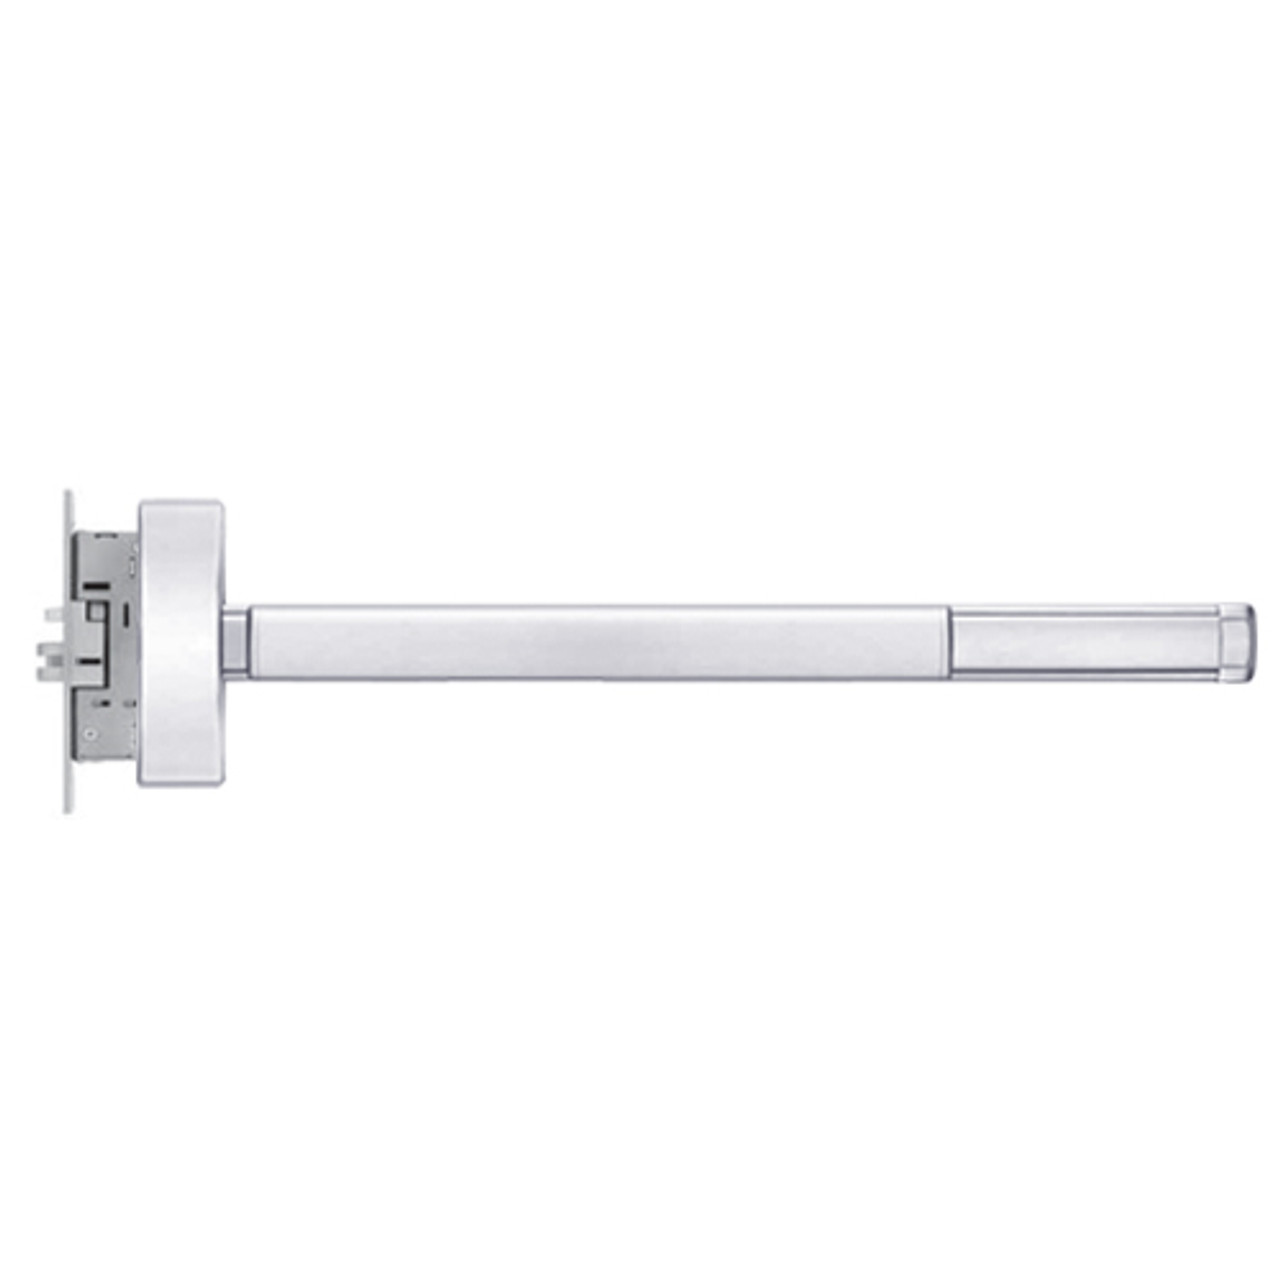 MLR2315-RHR-625-48 PHI 2300 Series Apex Mortise Exit Device with Motorized Latch Retraction Prepped for Thumb Piece Always Active in Bright Chrome Finish